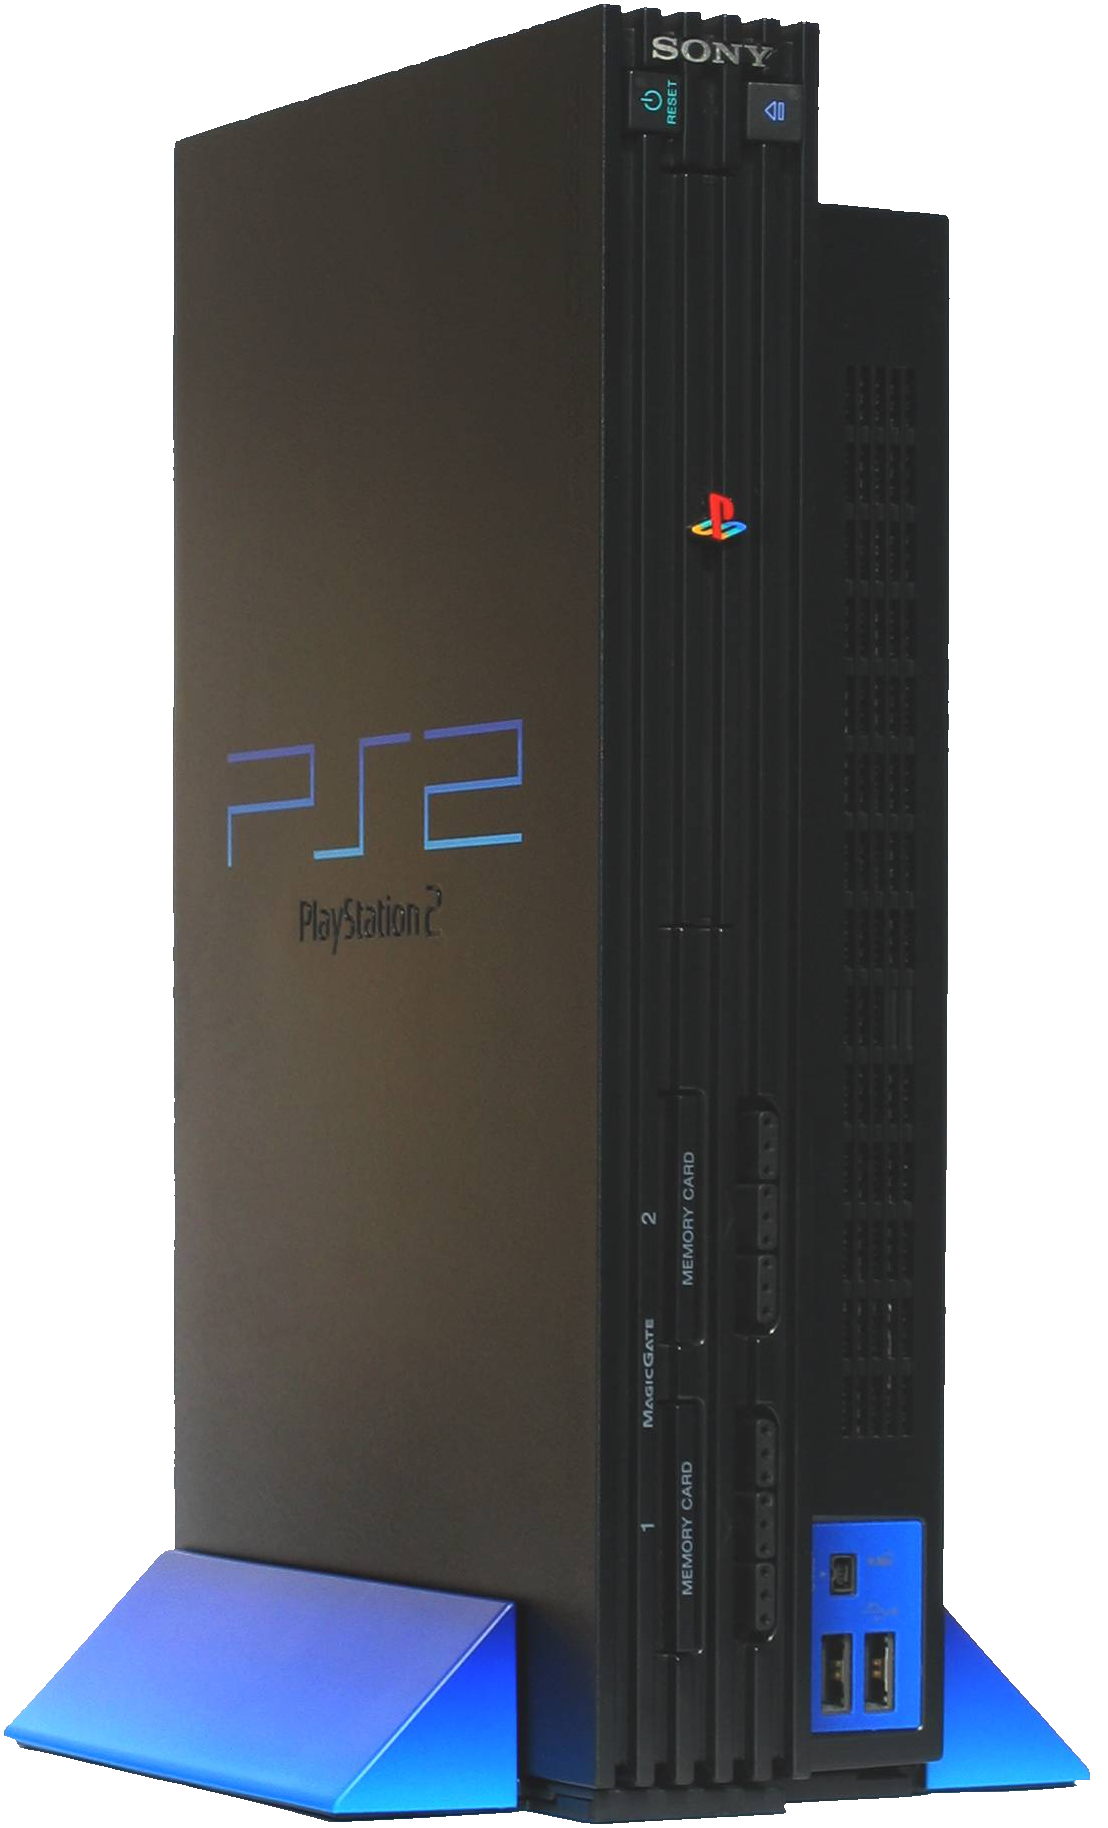 where can you buy a playstation 2